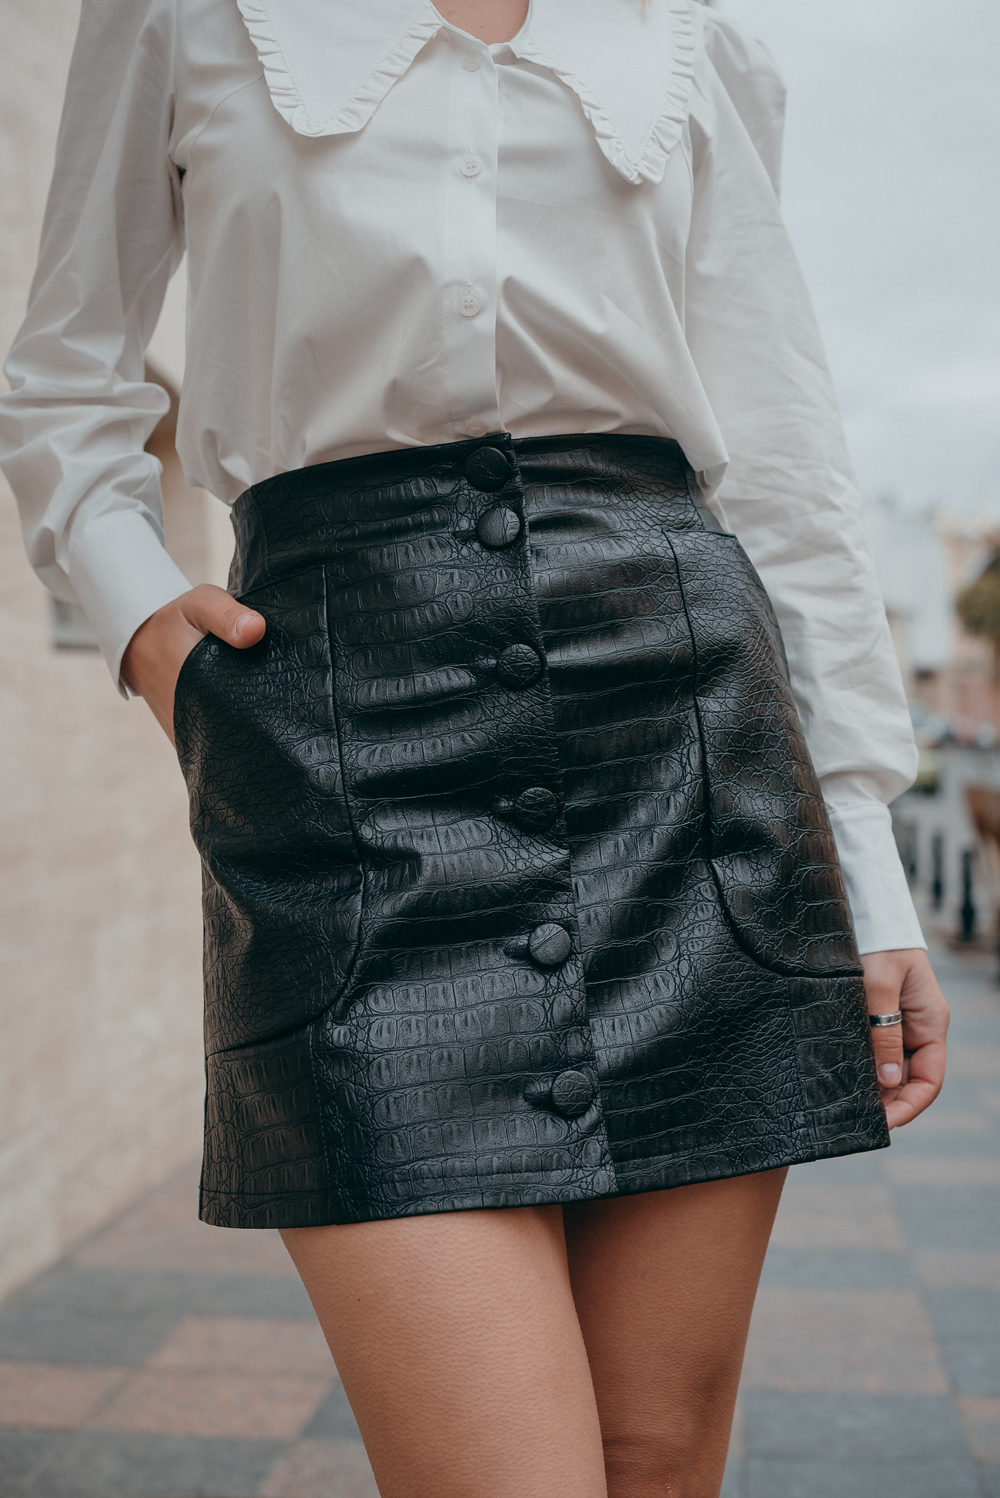 Black eco leather mini skirt with buttons ⭐ Women's clothing 